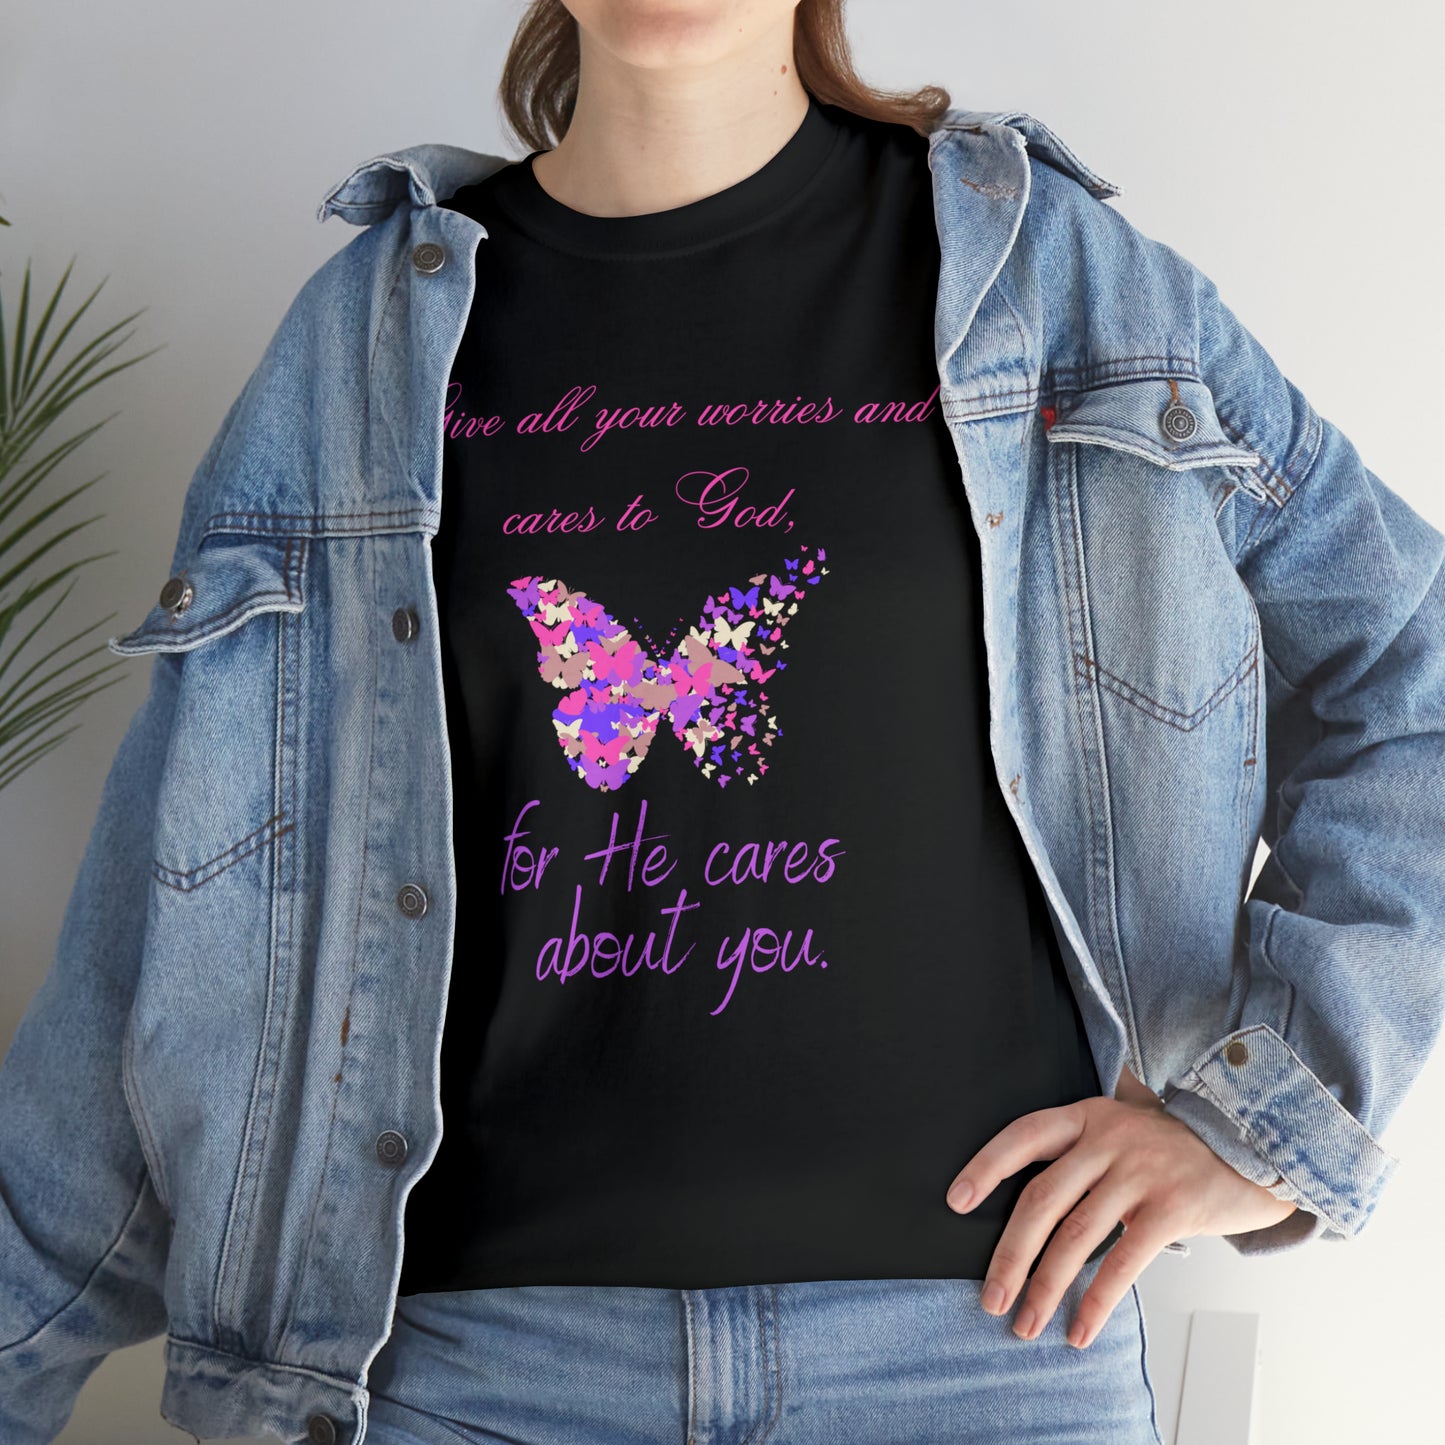 Christian Women's T-shirt | Give all your worries and cares to God